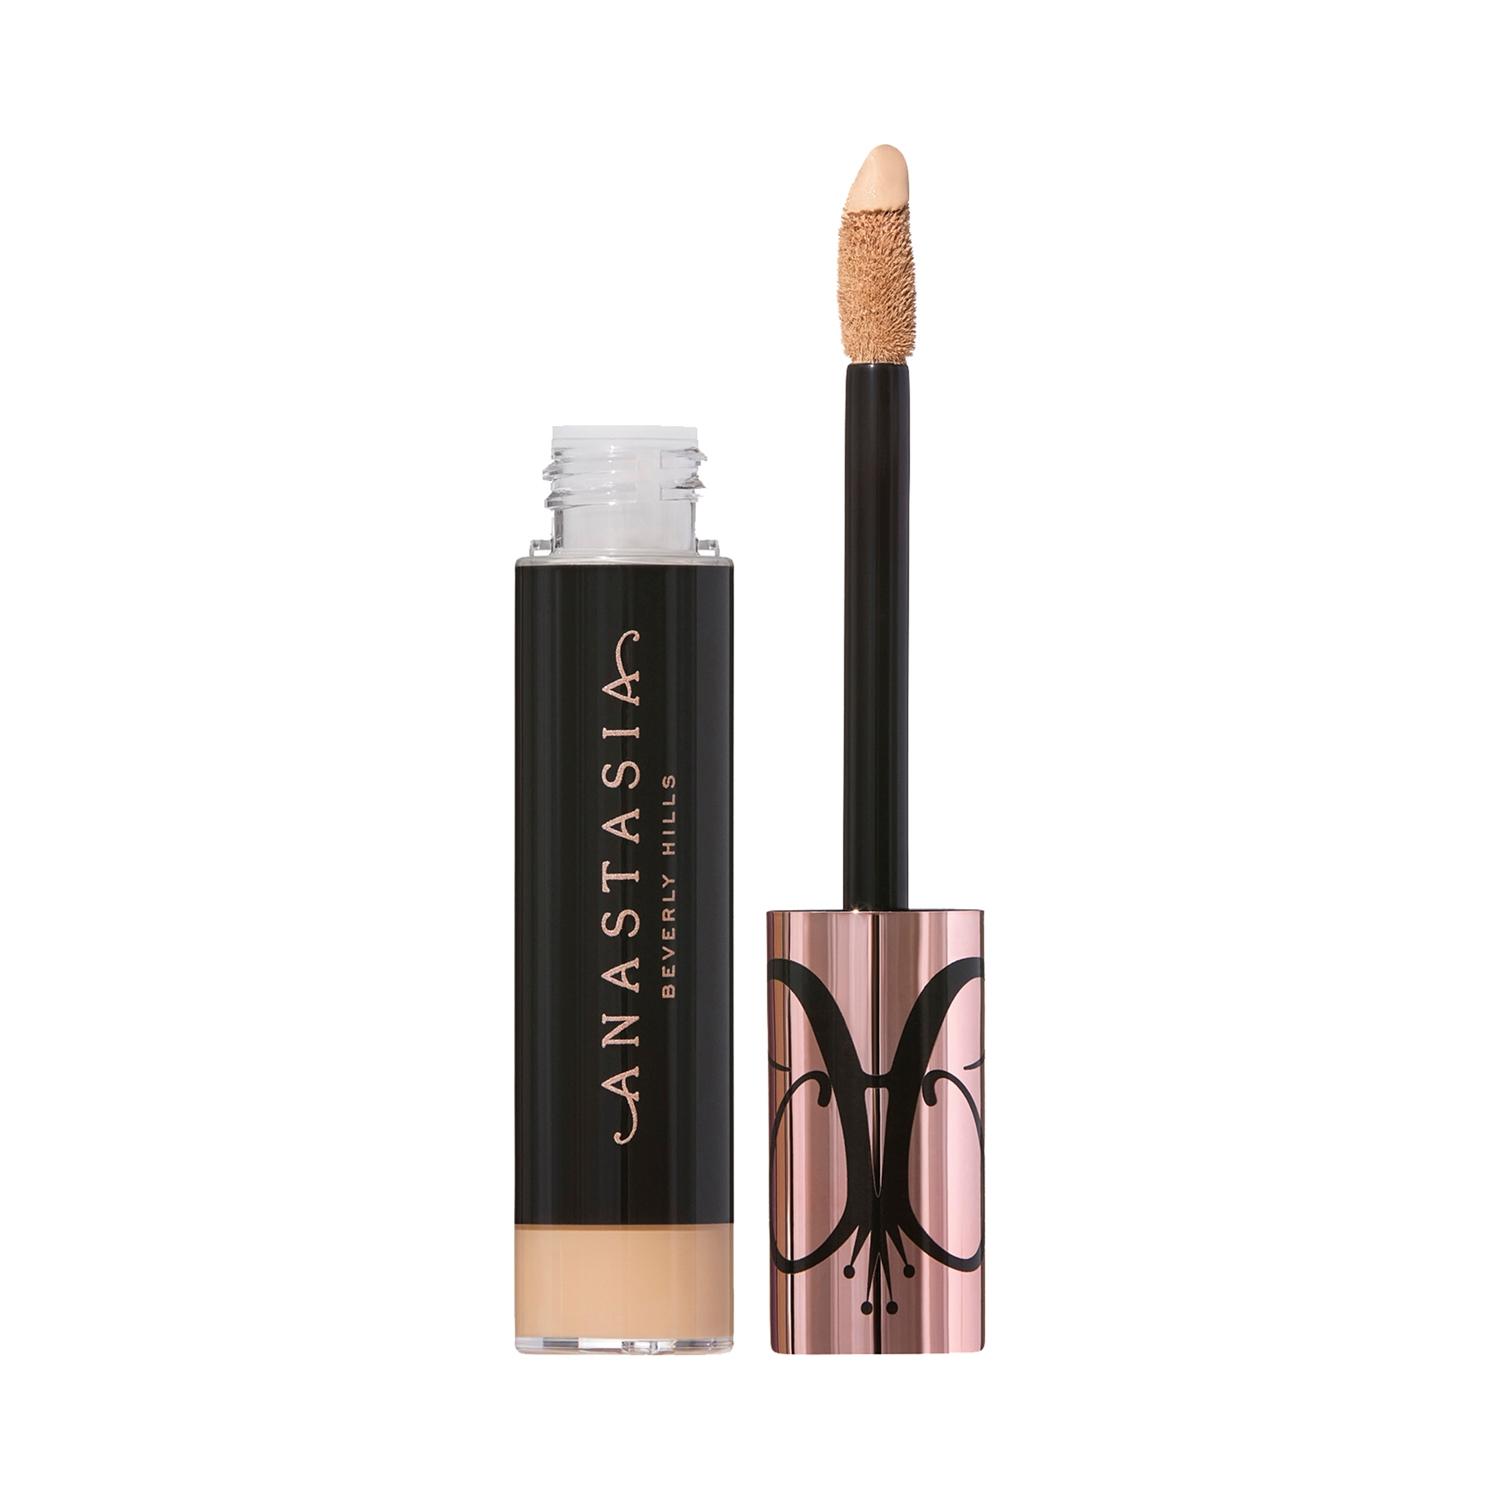 anastasia beverly hills magic touch concealer - shade 13 (12ml)